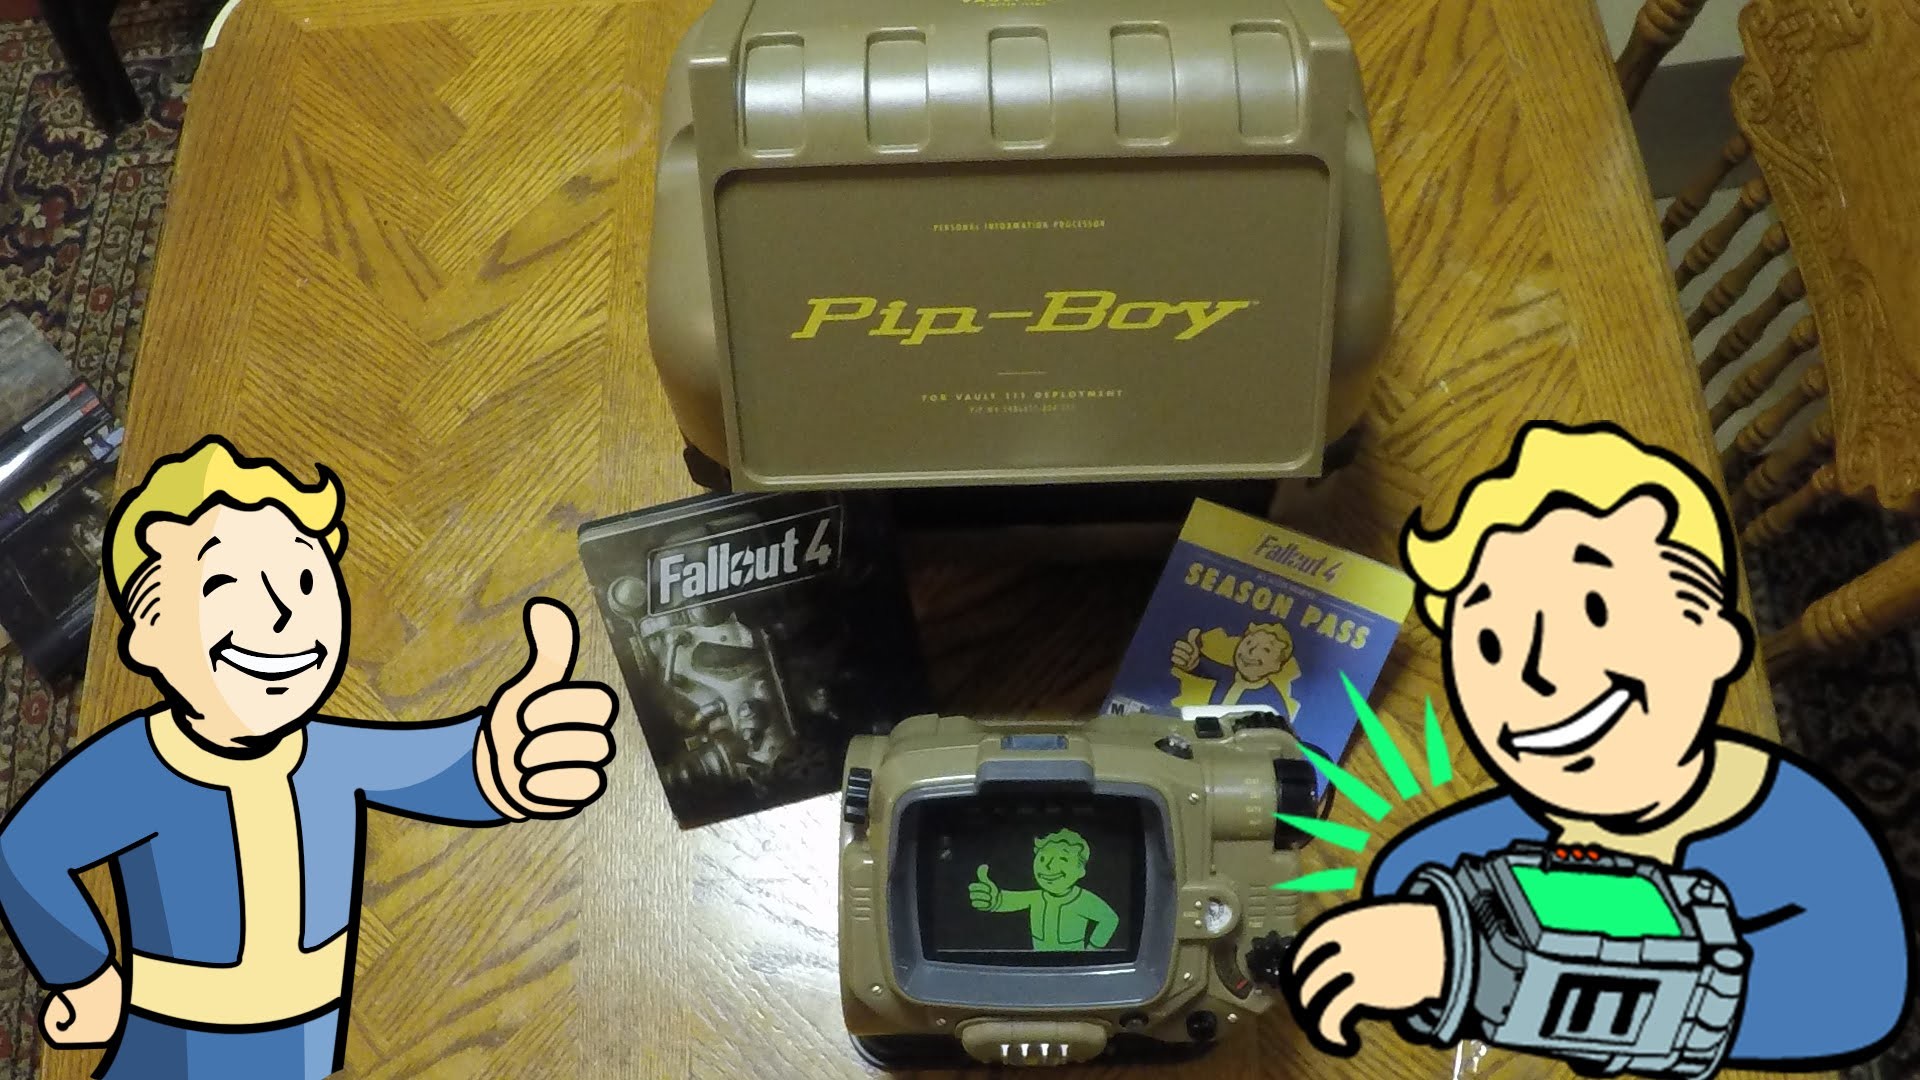 1920x1080 Fallout 4 Pip Boy Edition Unboxing Pocket Guide, Vault Tec Perk Poster -  Biki Unboxing - YouTube